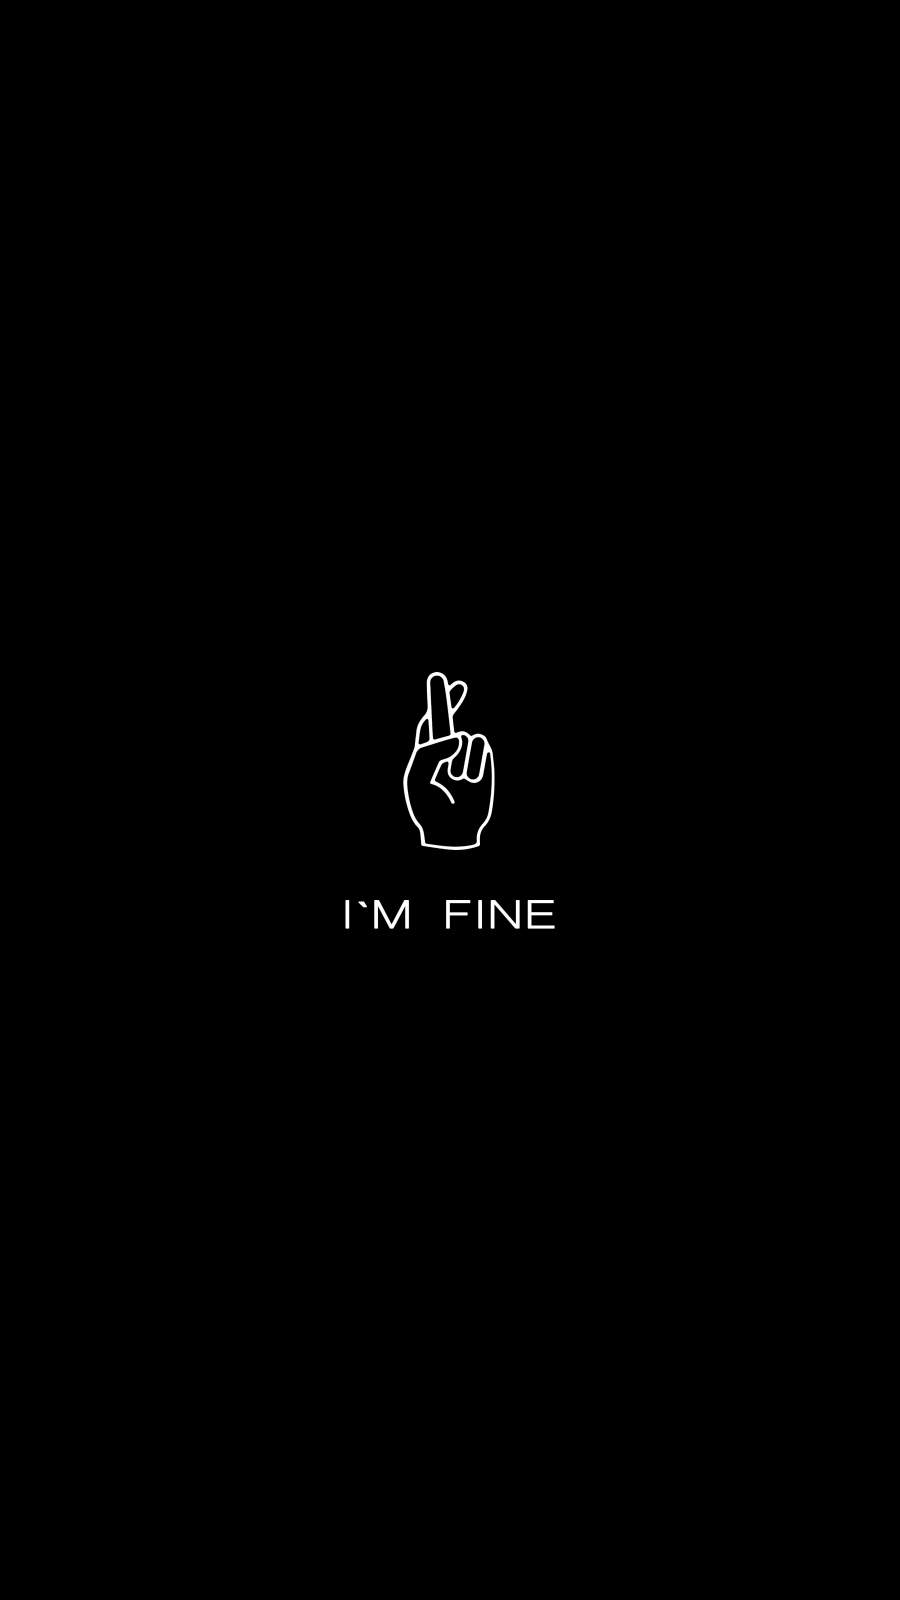 I Am Fine - Iphone Wallpapers : Iphone Wallpapers